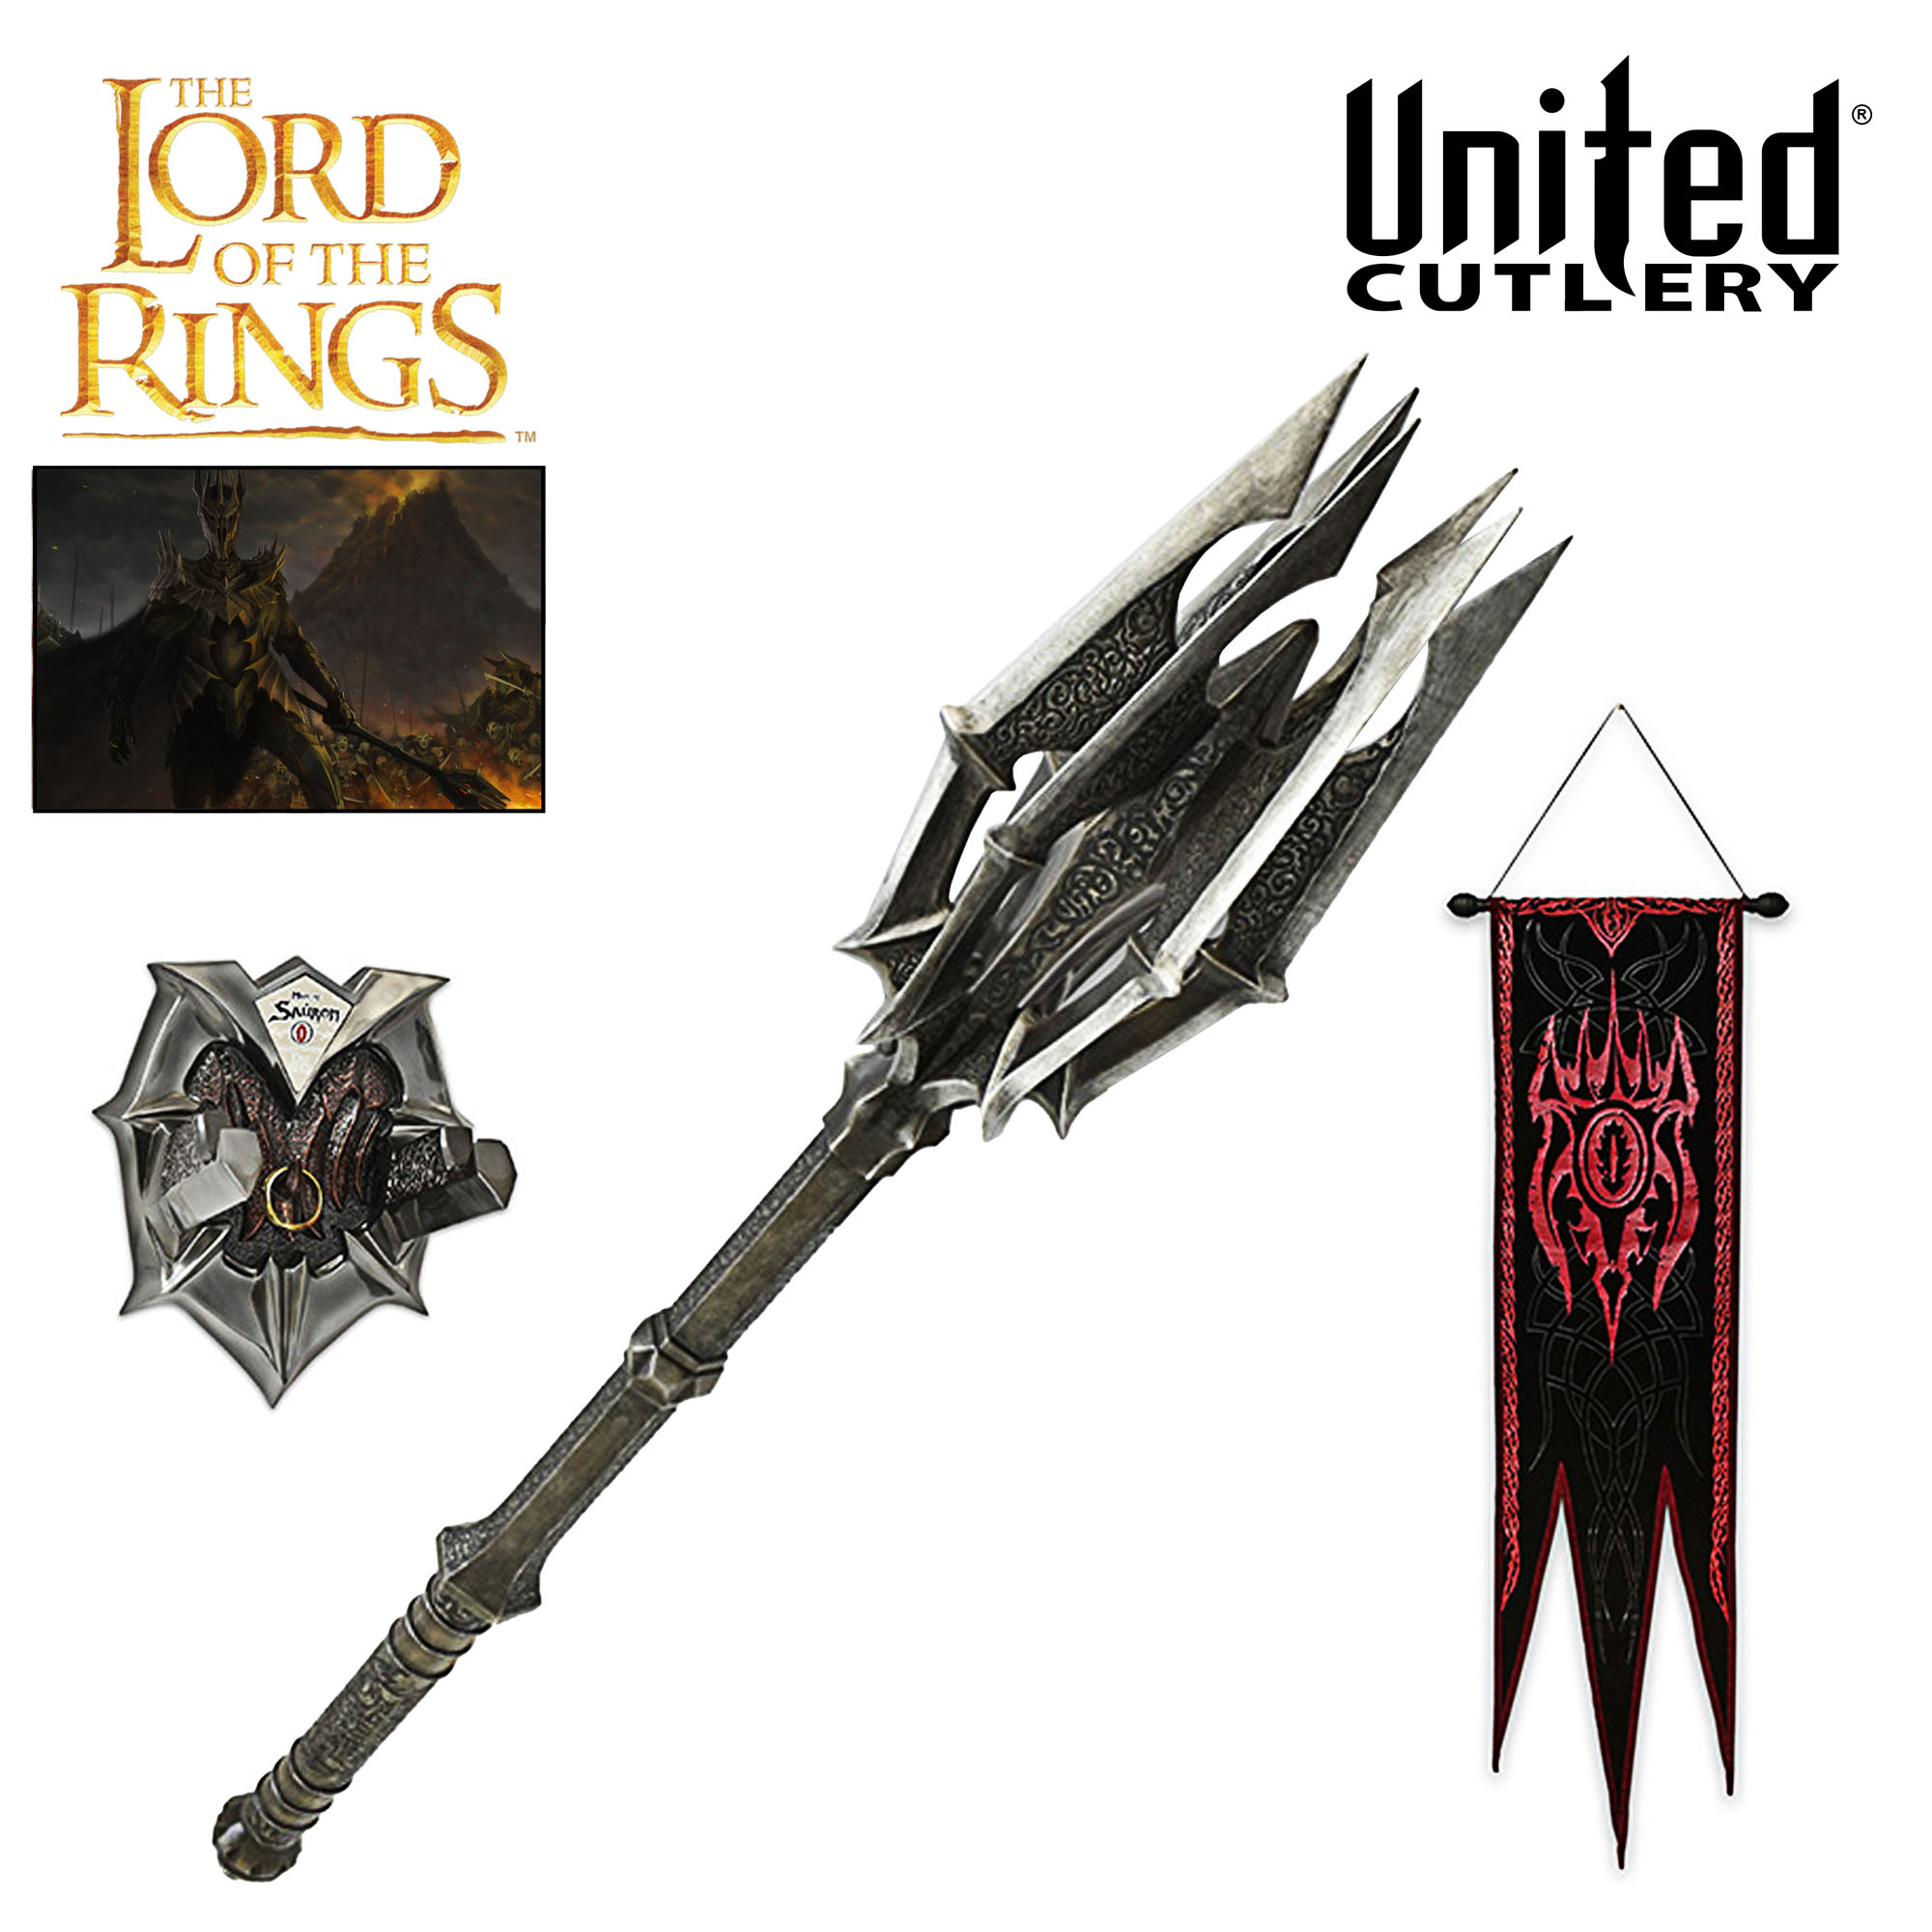 The Mace Of Sauron And Ring Red Eye Edition With War Banner